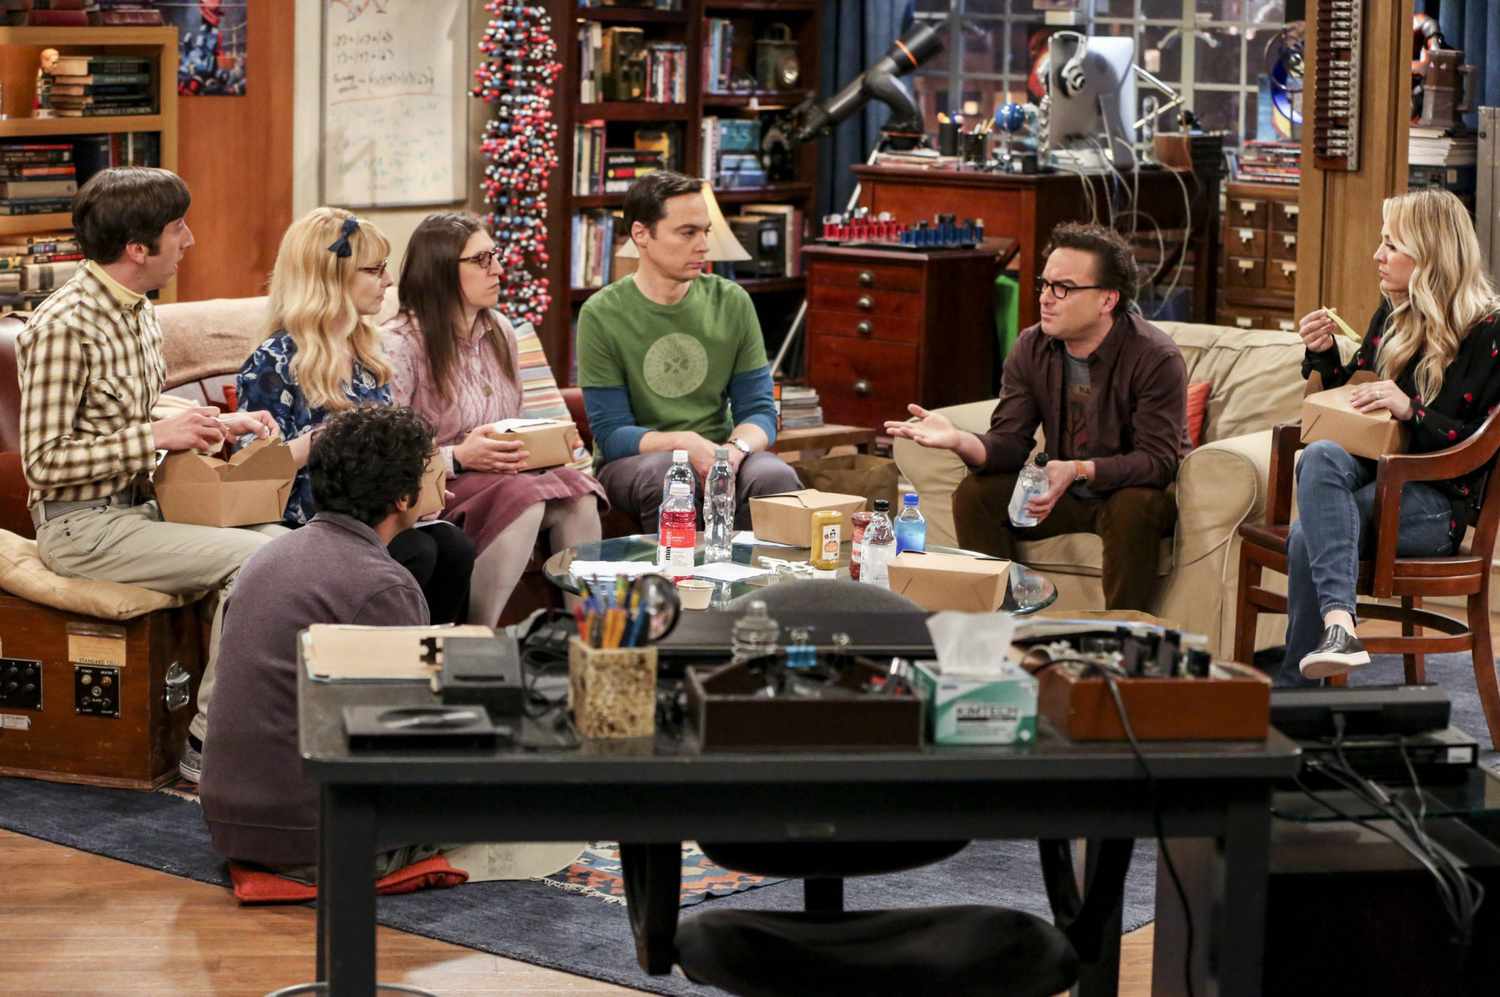 "The Plagiarism Schism" -- Pictured: Howard Wolowitz (Simon Helberg), Bernadette (Melissa Rauch), Rajesh Koothrappali (Kunal Nayyar), Amy Farrah Fowler (Mayim Bialik), Sheldon Cooper (Jim Parsons), Leonard Hofstadter (Johnny Galecki) and Penny (Kaley Cuoco). Kripke (John Ross Bowie) has proof that Dr. Pemberton (Sean Astin) plagiarized his thesis in college, and Sheldon and Amy aren't sure if they should turn him in or not. Also, Wolowitz is happily surprised to learn that Bernadette wasn't the only waitress at the Cheesecake Factory who had a crush on him back in the day, on THE BIG BANG THEORY, Thursday, May 2 (8:00-8:31 PM, ET/PT) on the CBS Television Network. Photo: Michael Yarish/Warner Bros. Entertainment Inc. ÃÂ© 2019 WBEI. All rights reserved.